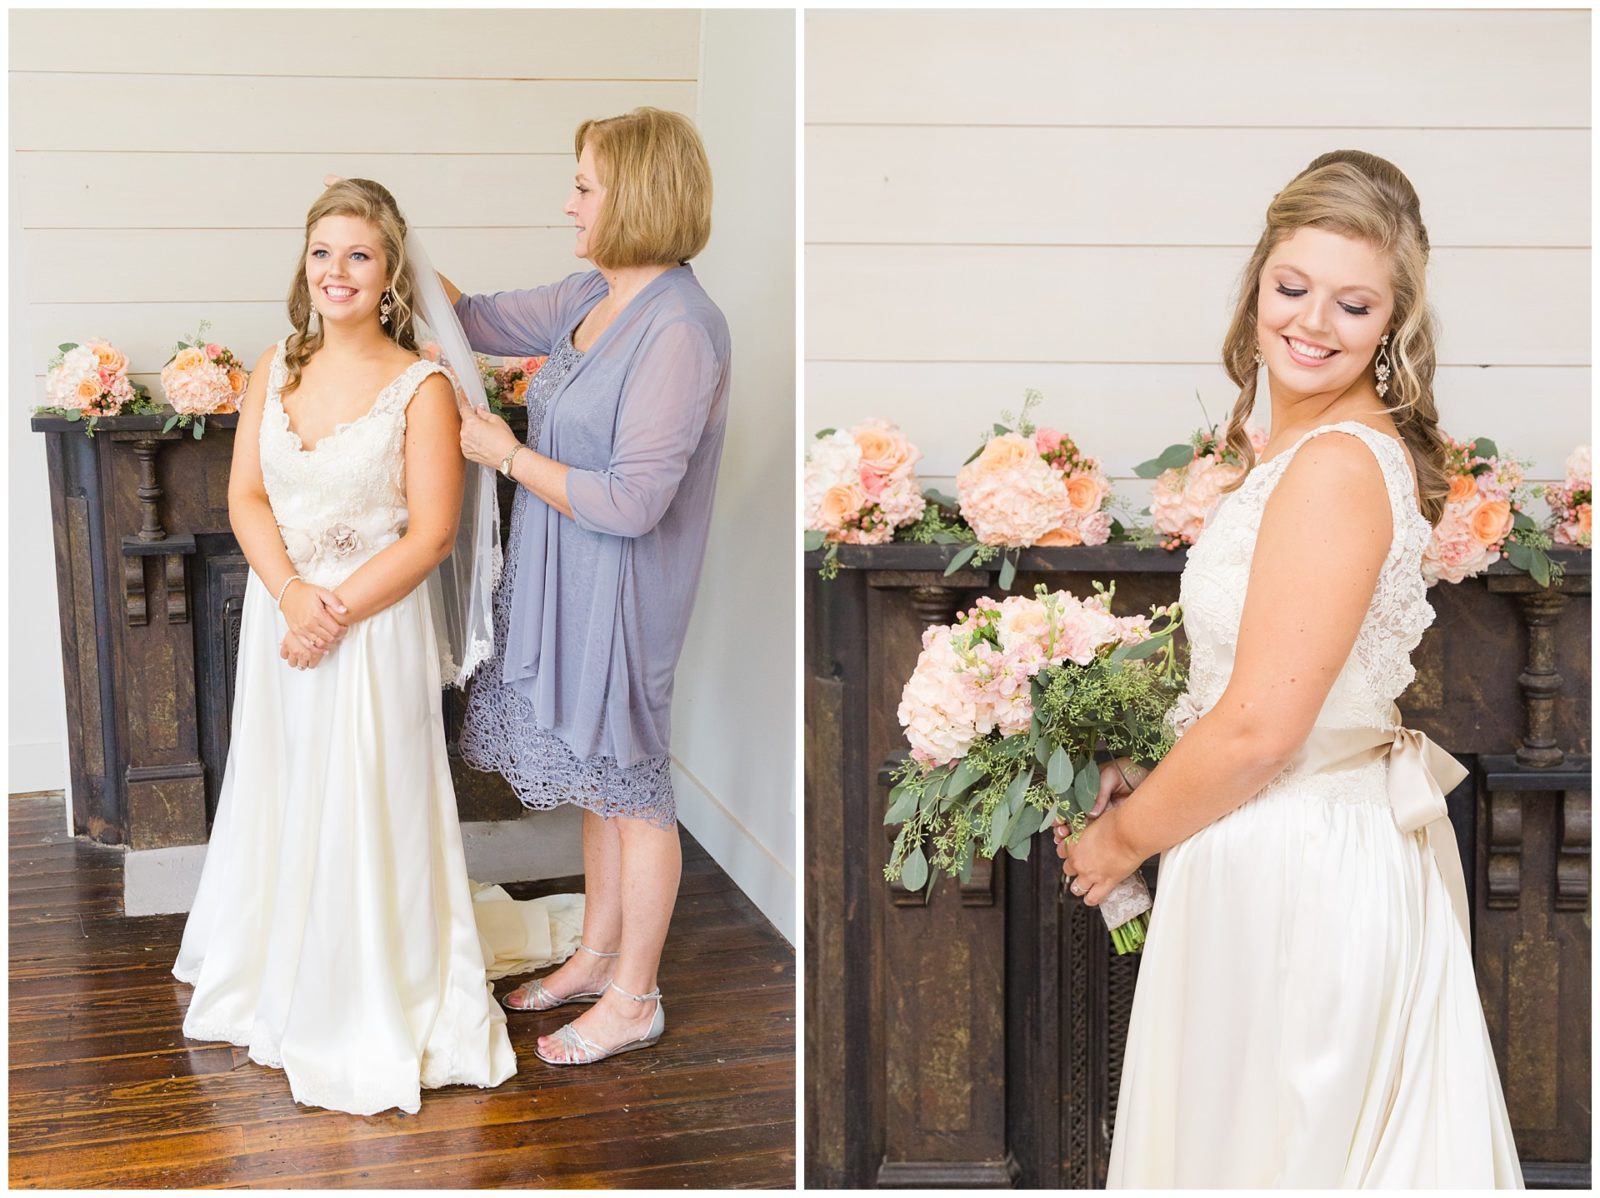 Wedding Bridal Suite Photos at the Barn at McCall Springs in Lawrenceburg, Kentucky.